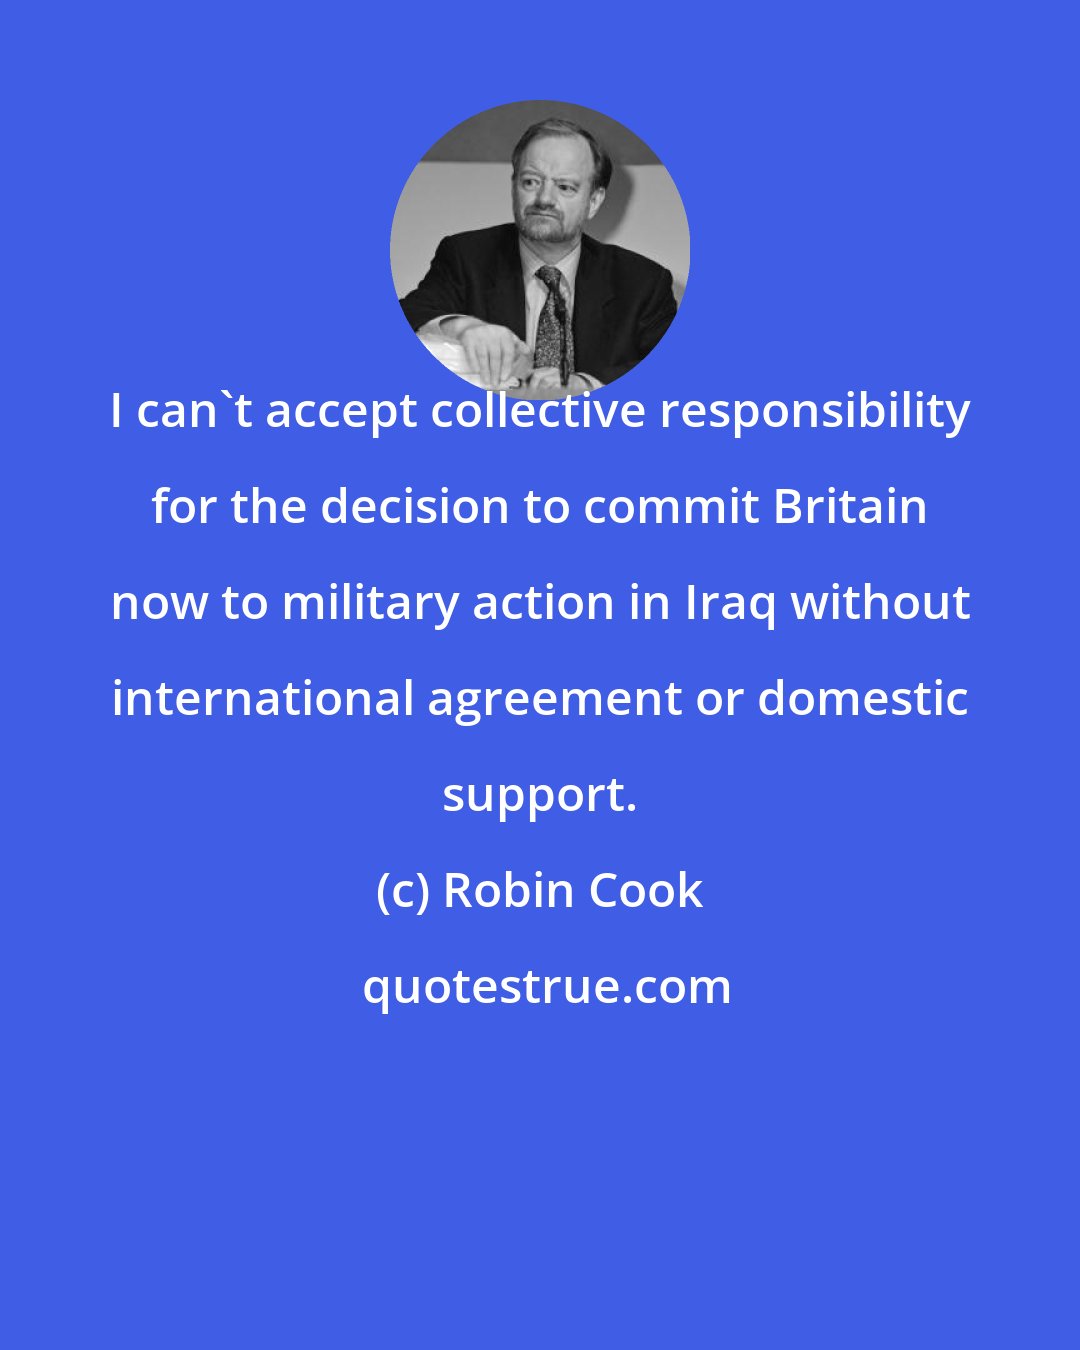 Robin Cook: I can't accept collective responsibility for the decision to commit Britain now to military action in Iraq without international agreement or domestic support.